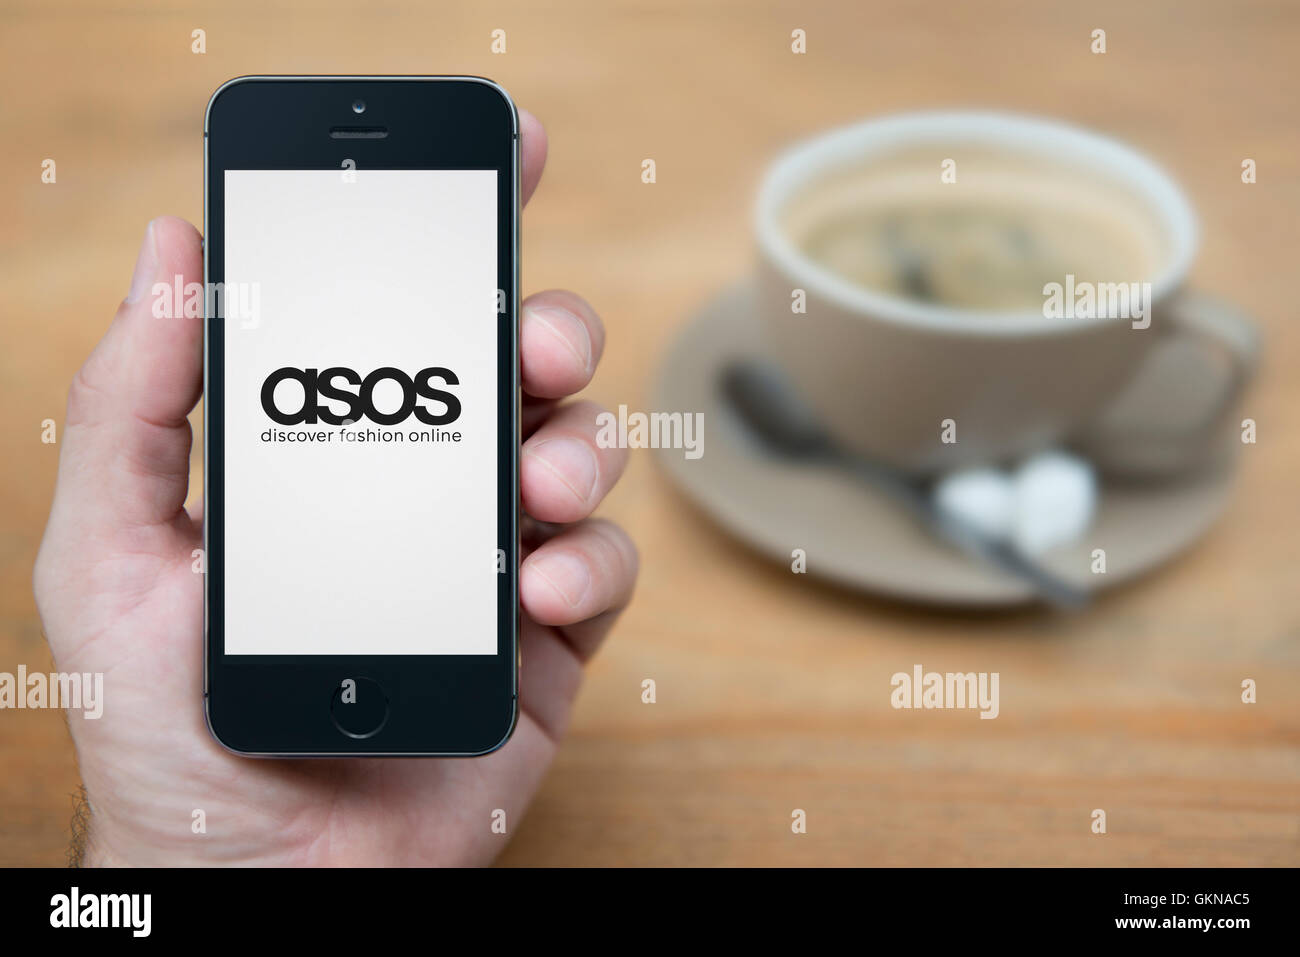 A man looks at his iPhone which displays the ASOS logo, while sat with a cup of coffee (Editorial use only). Stock Photo